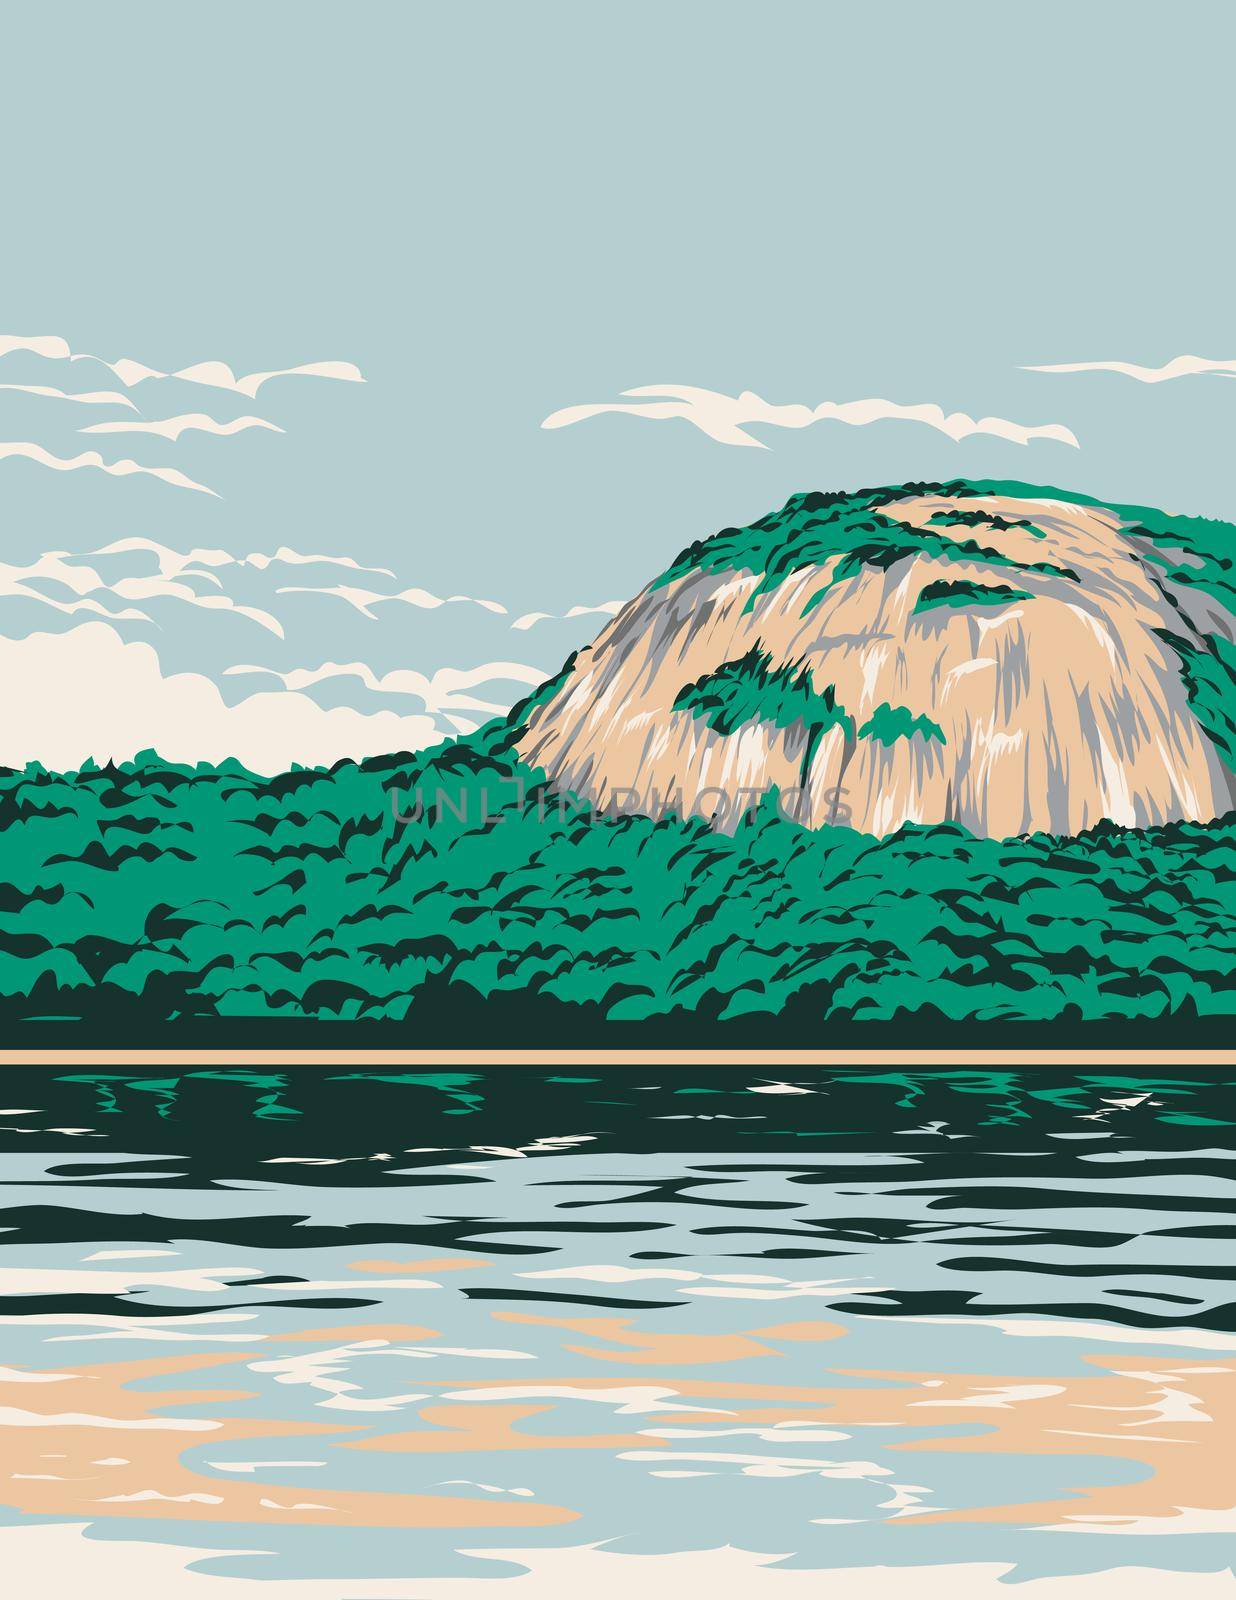 WPA poster art of Echo Lake State Park with Echo Lake, Cathedral Ledge and White Horse Ledge located in North Conway, New Hampshire United States USA done in works project administration style.
